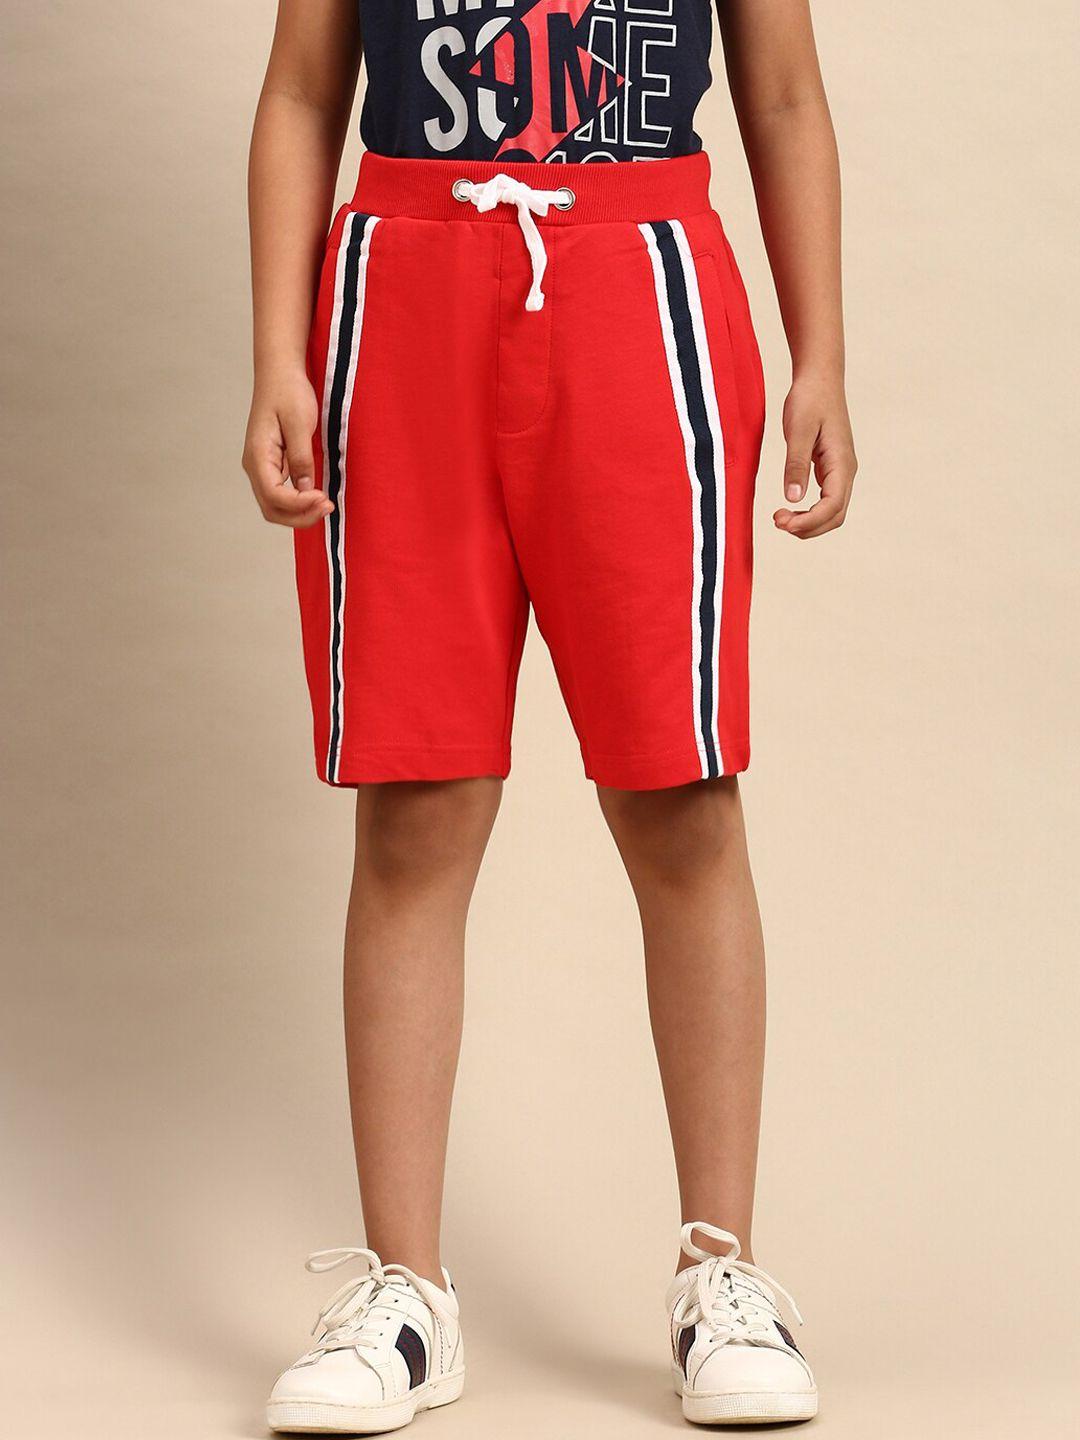 pipin-boys-red-striped-shorts